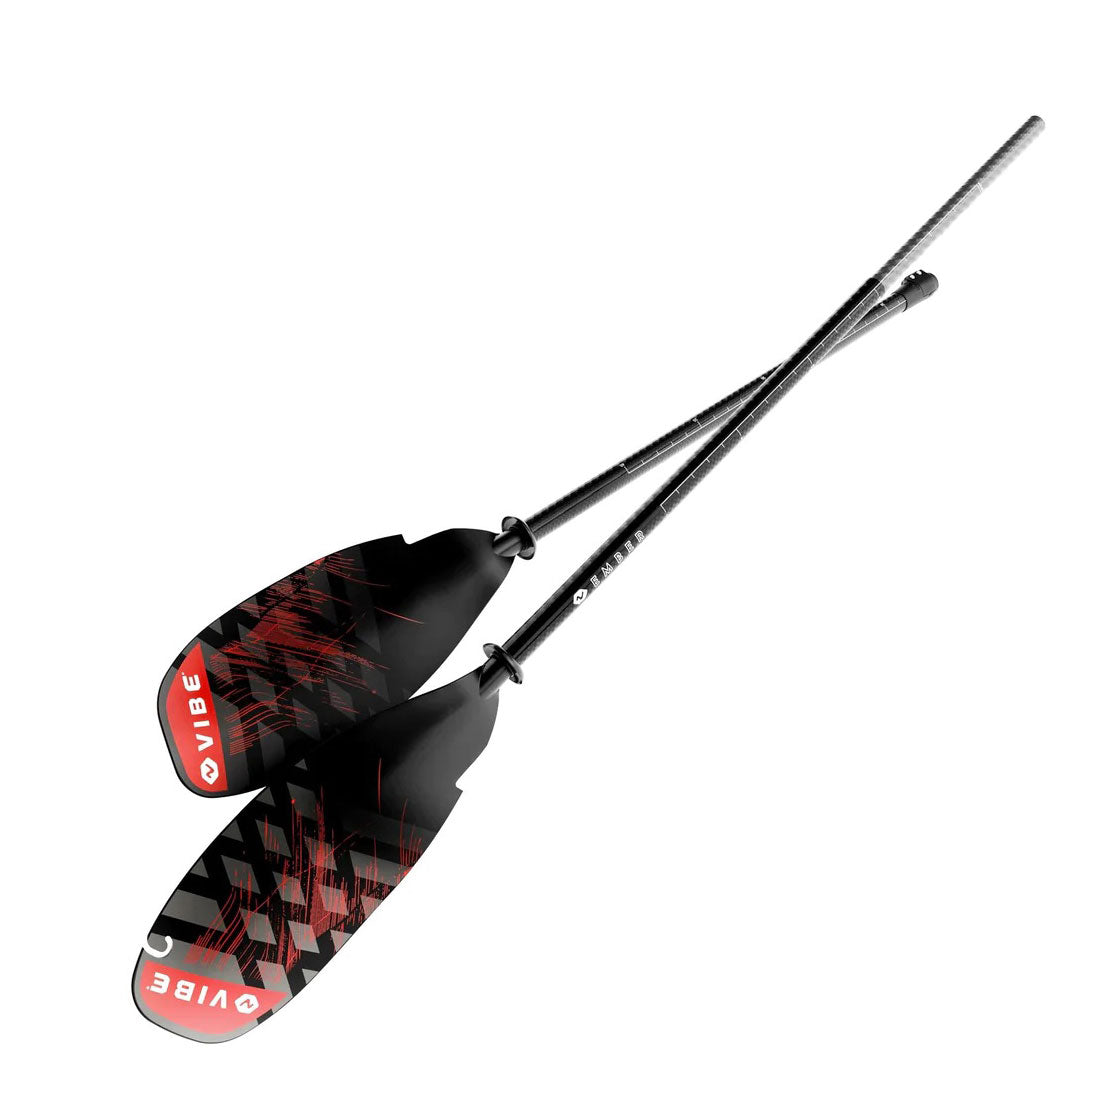 Entire vibe carbon kayak paddle in Tsunami Red showing the split function, fish ruler and detailing